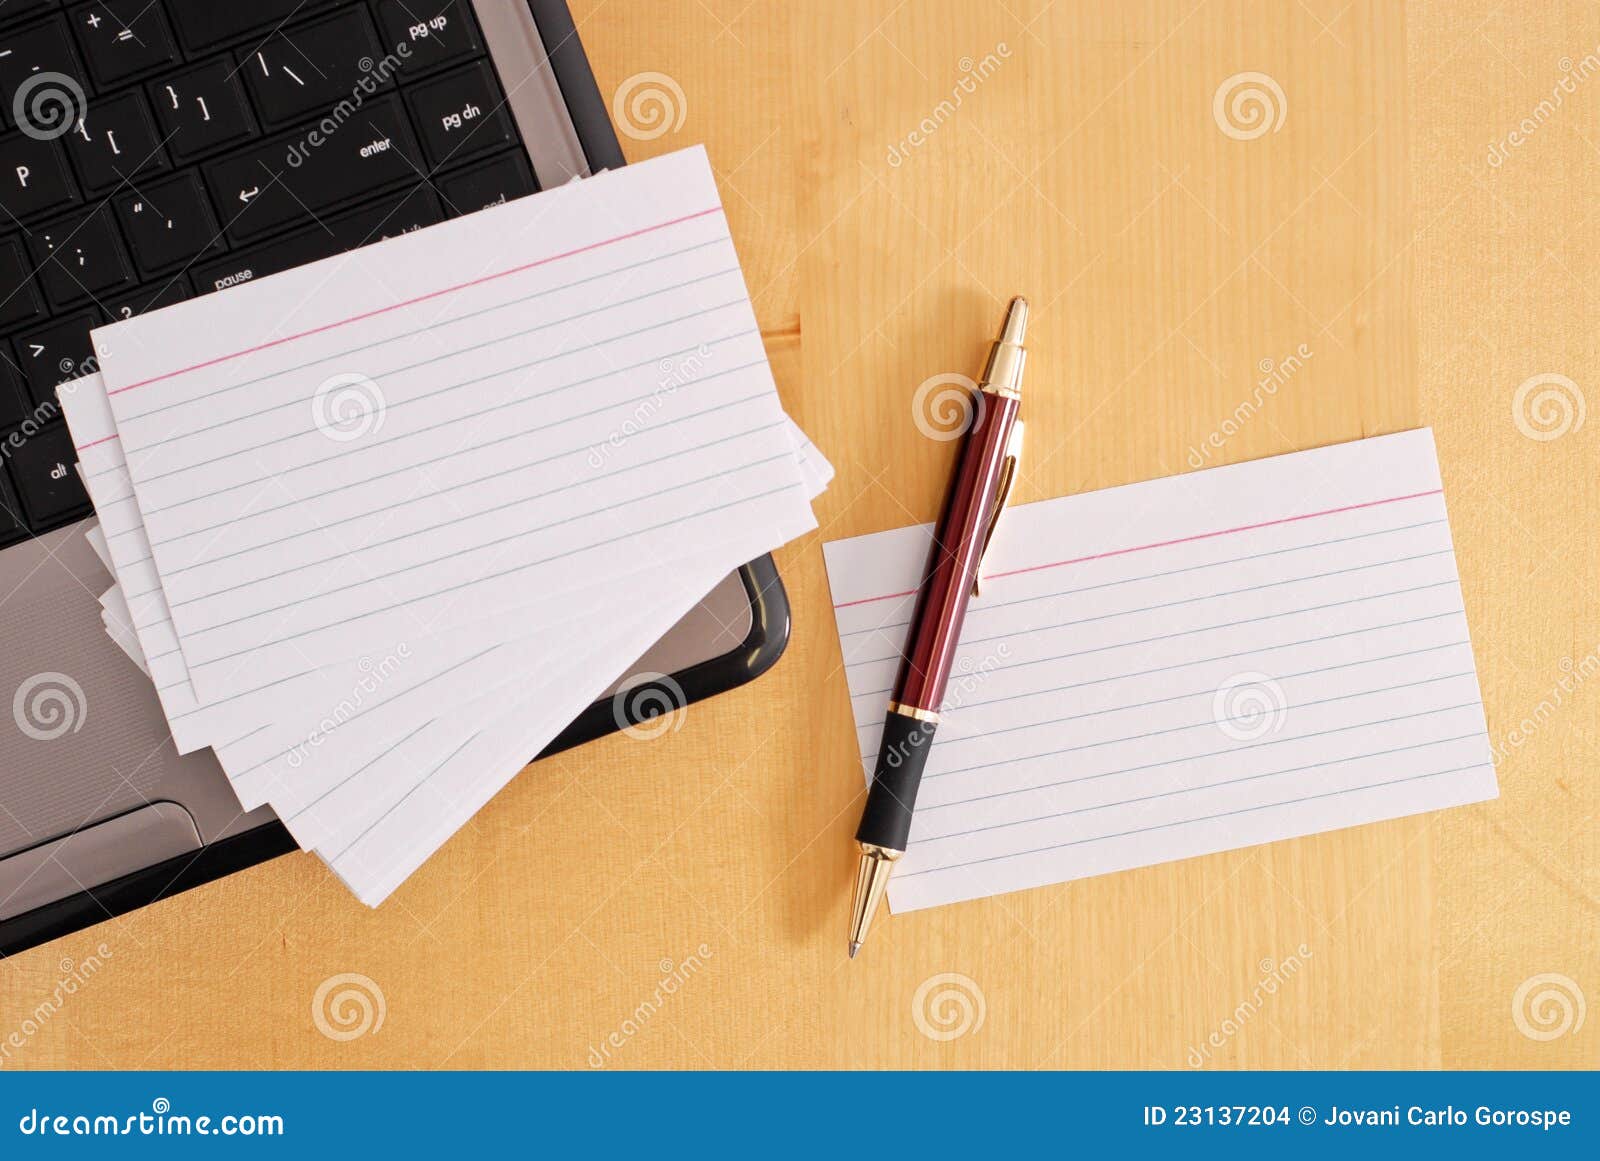 Blank Flash Cards Stock Images - Image: 23137204